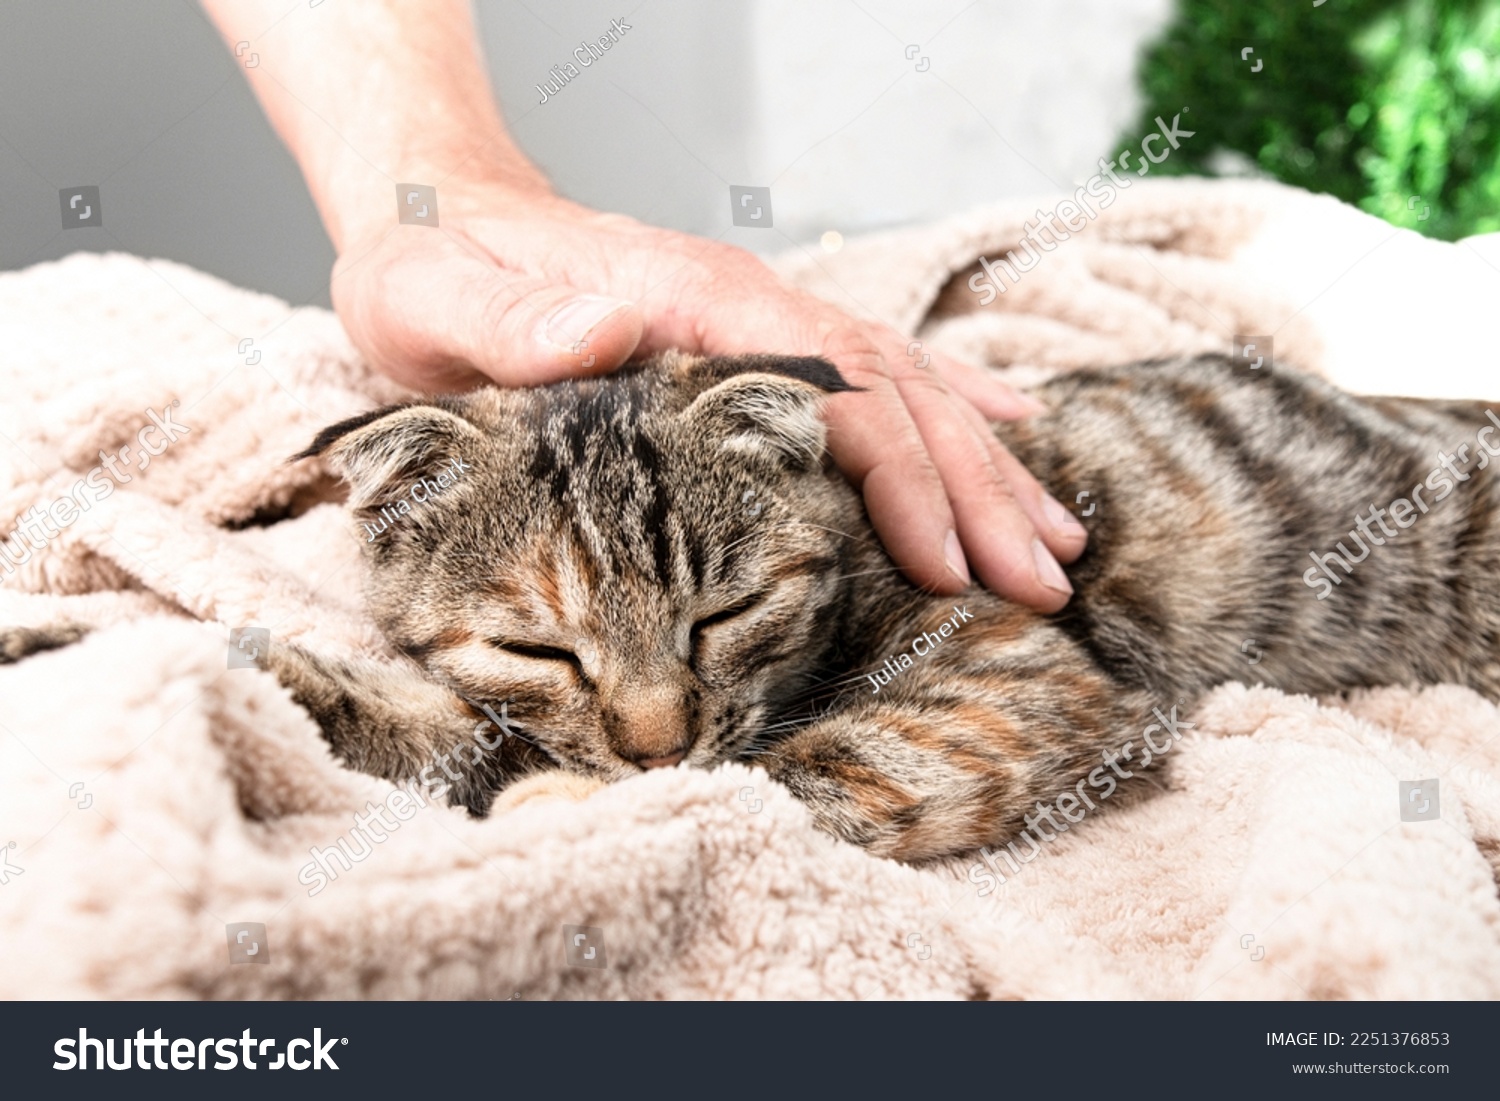 A striped cat rests and sleeps lying on a blanket in a room, a man's hand caresses the pet. Relationship between man and animal. #2251376853